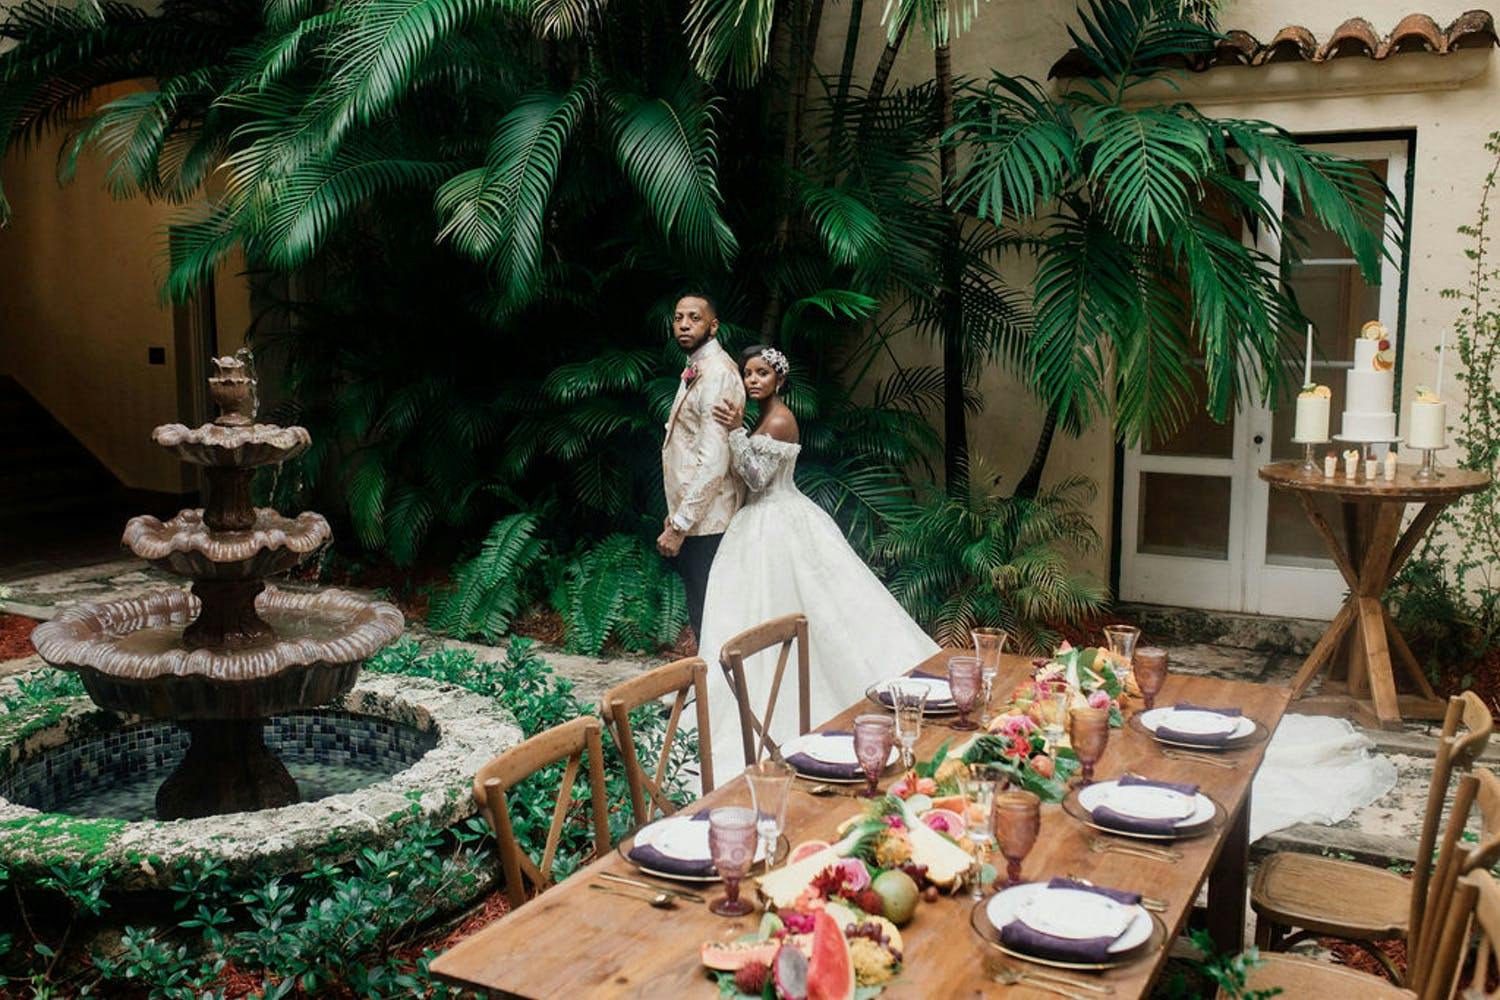 Bride and groom stand behind wooden table laden with tropical fruit in courtyard filled with tropical greenery | PartySlate